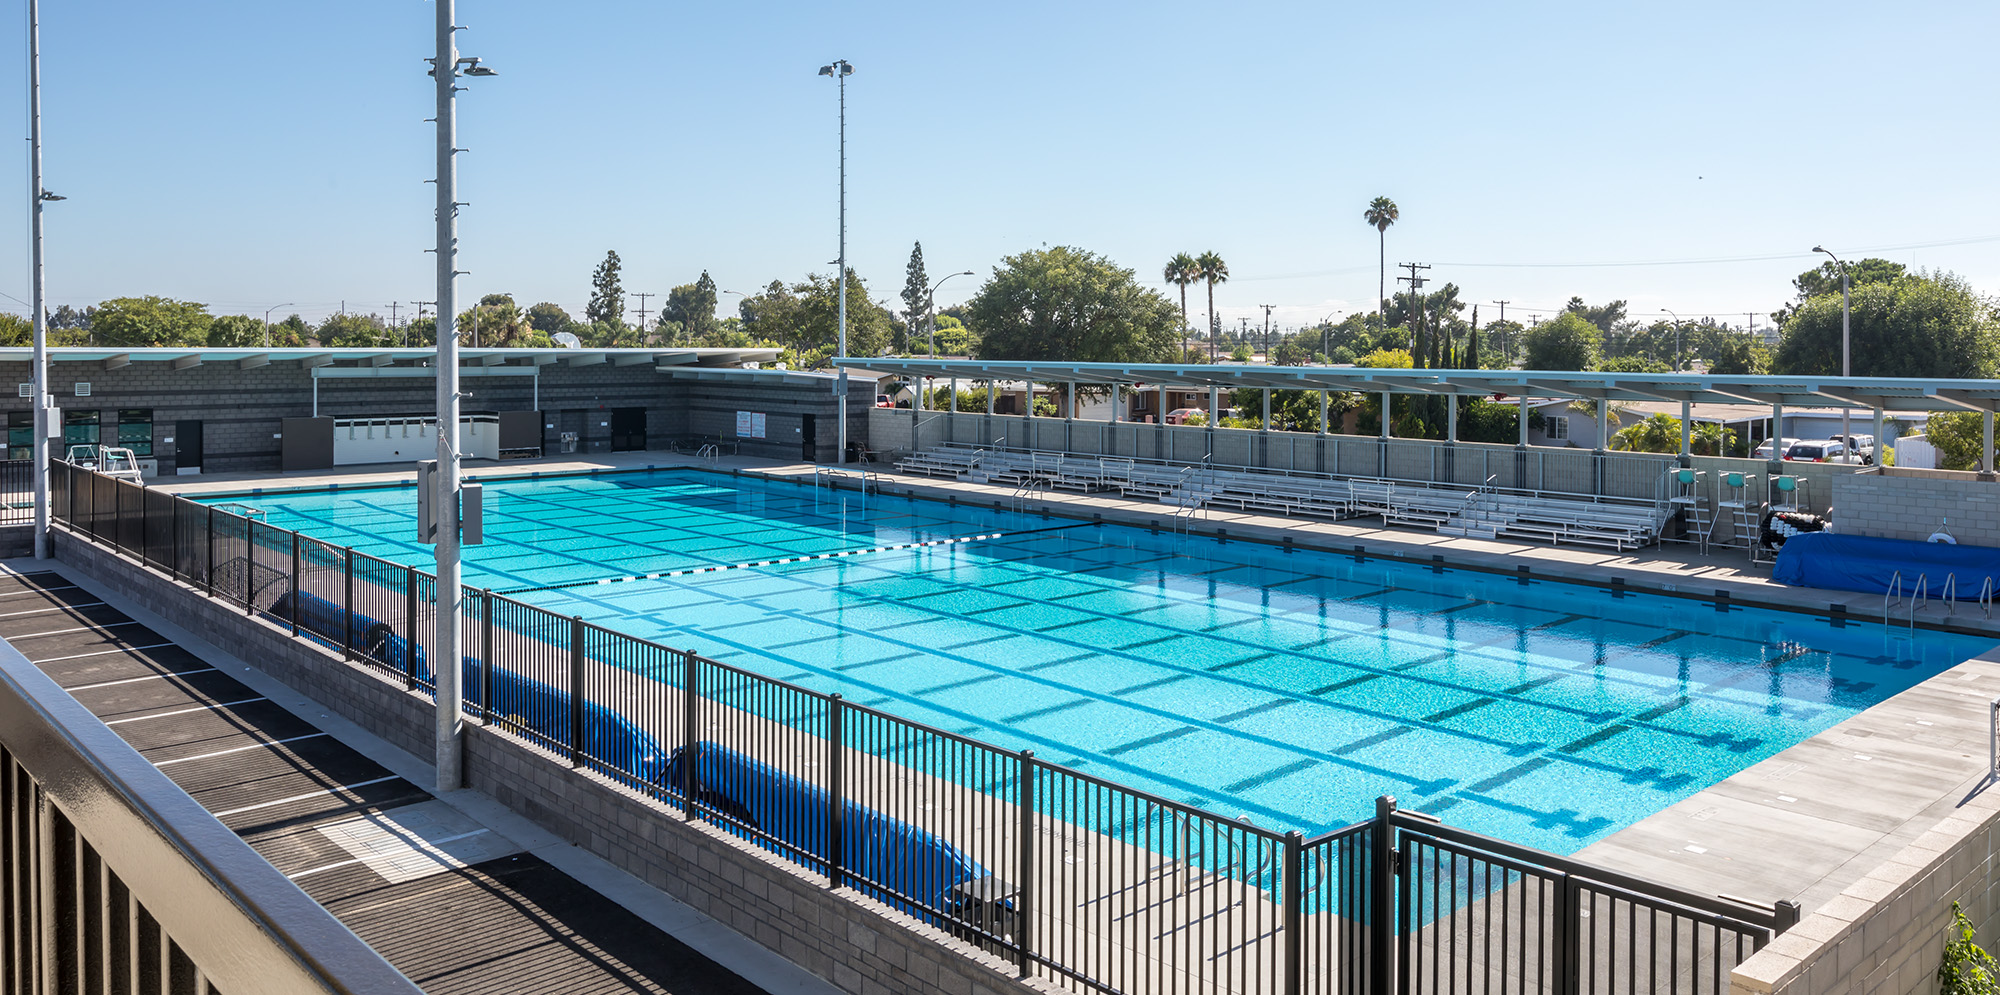 Outdoor swimming pool at Servite High School in Anaheim